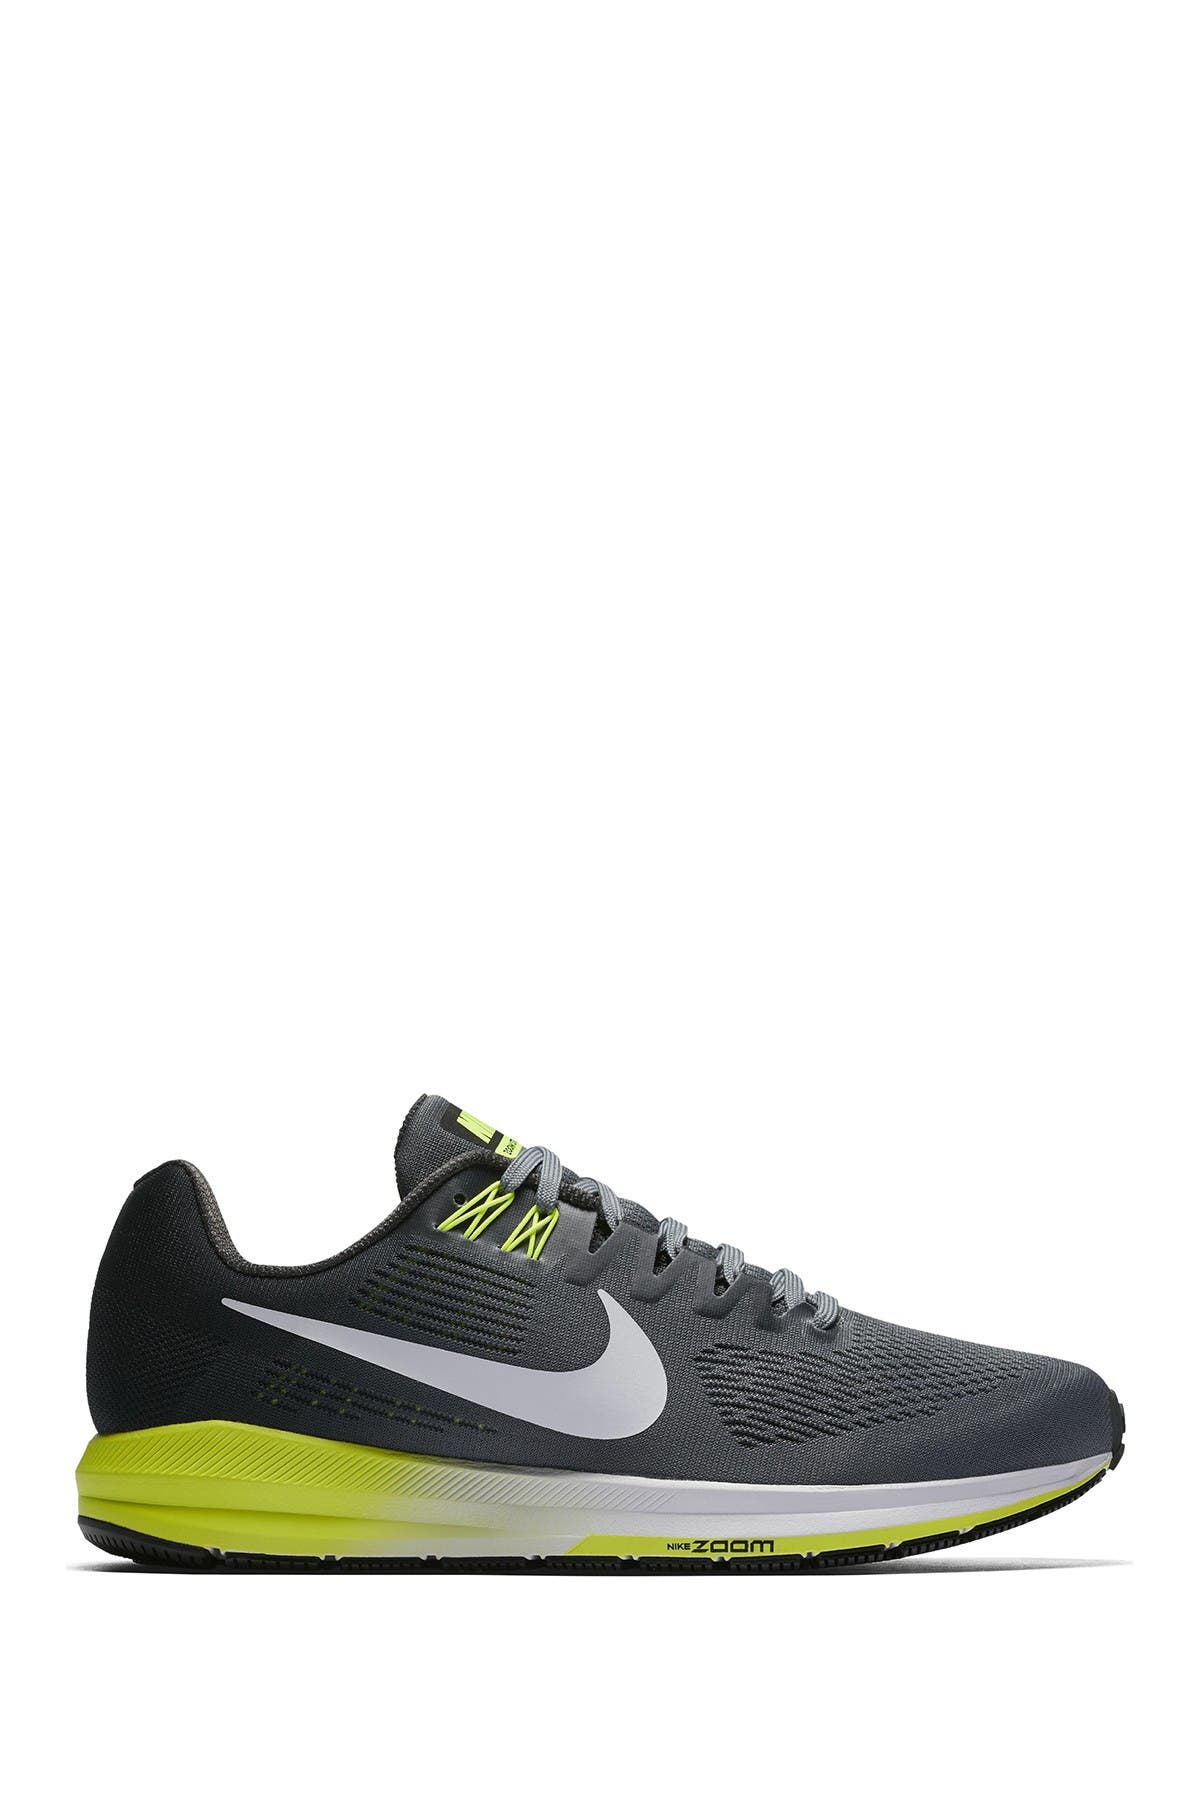 nike zoom structure 21 dynamic fit